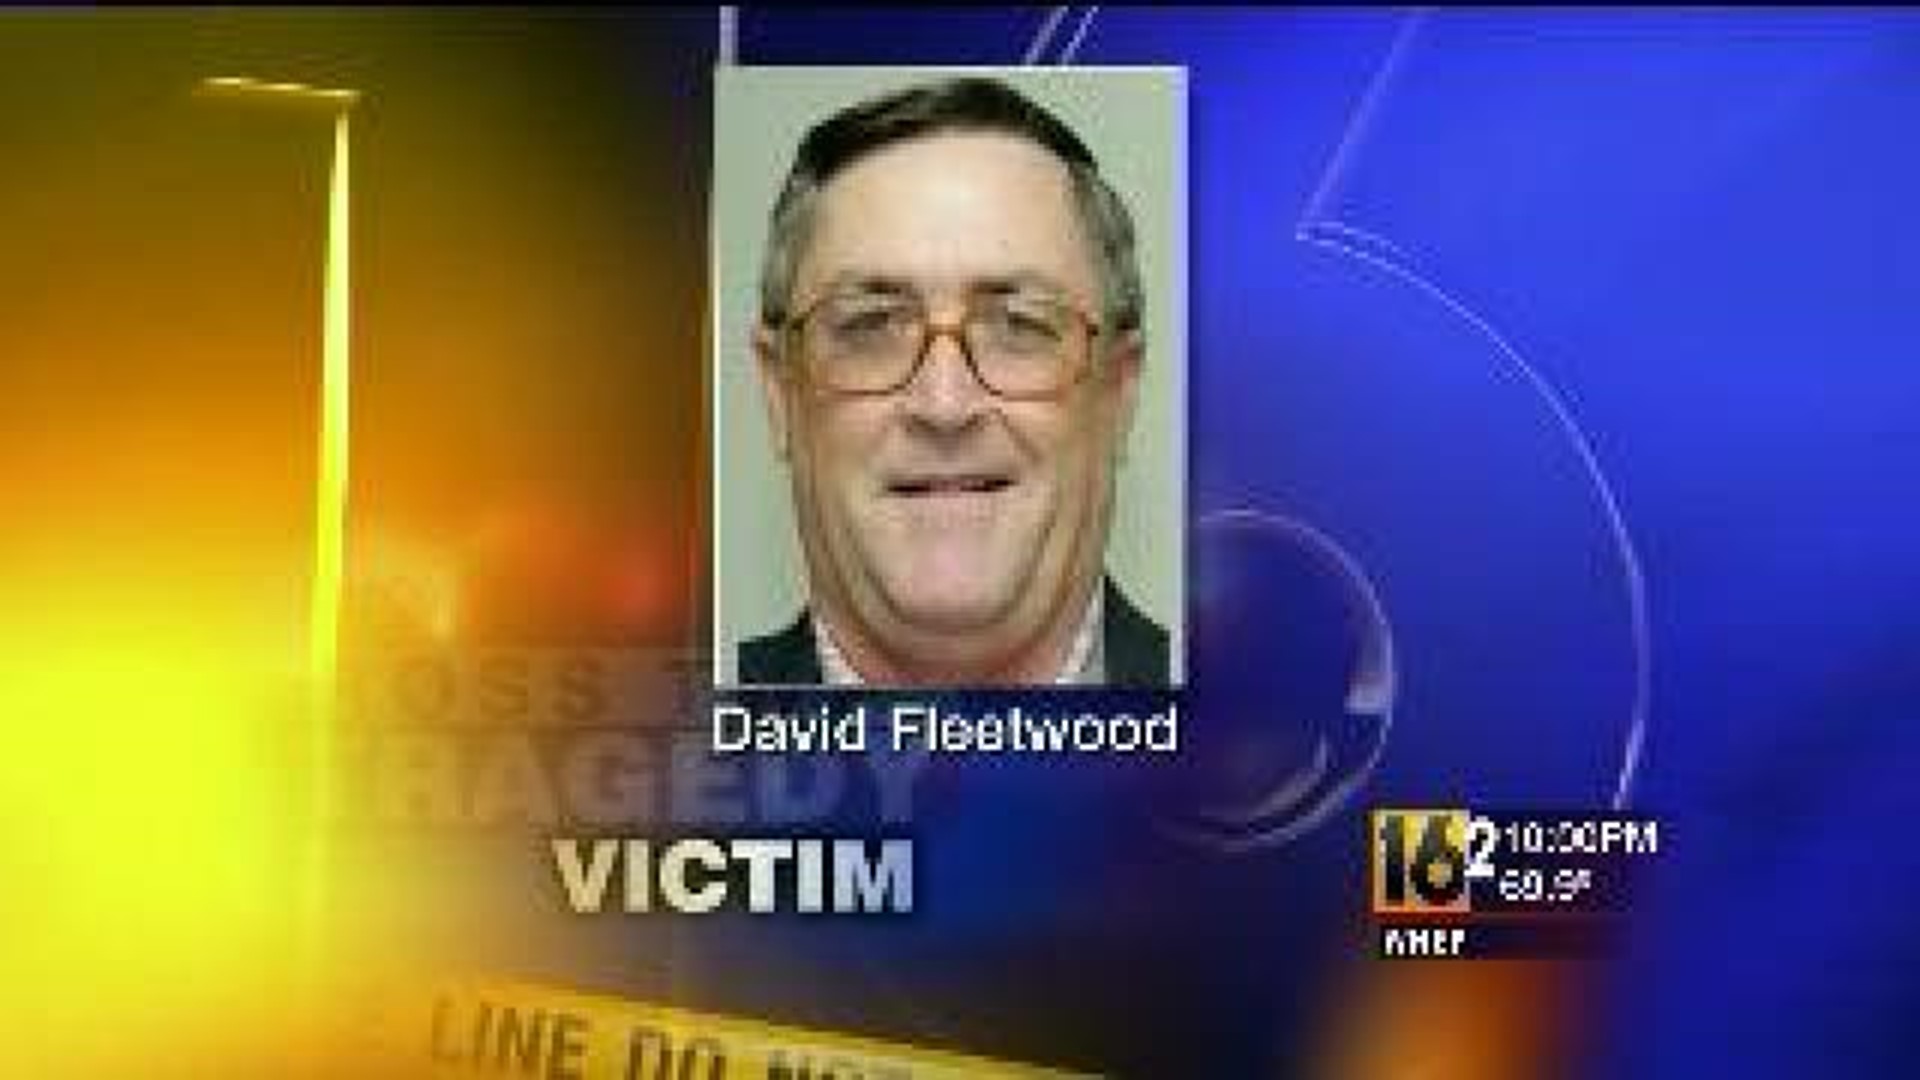 Funeral for David Fleetwood, Ross Township Tragedy Victim